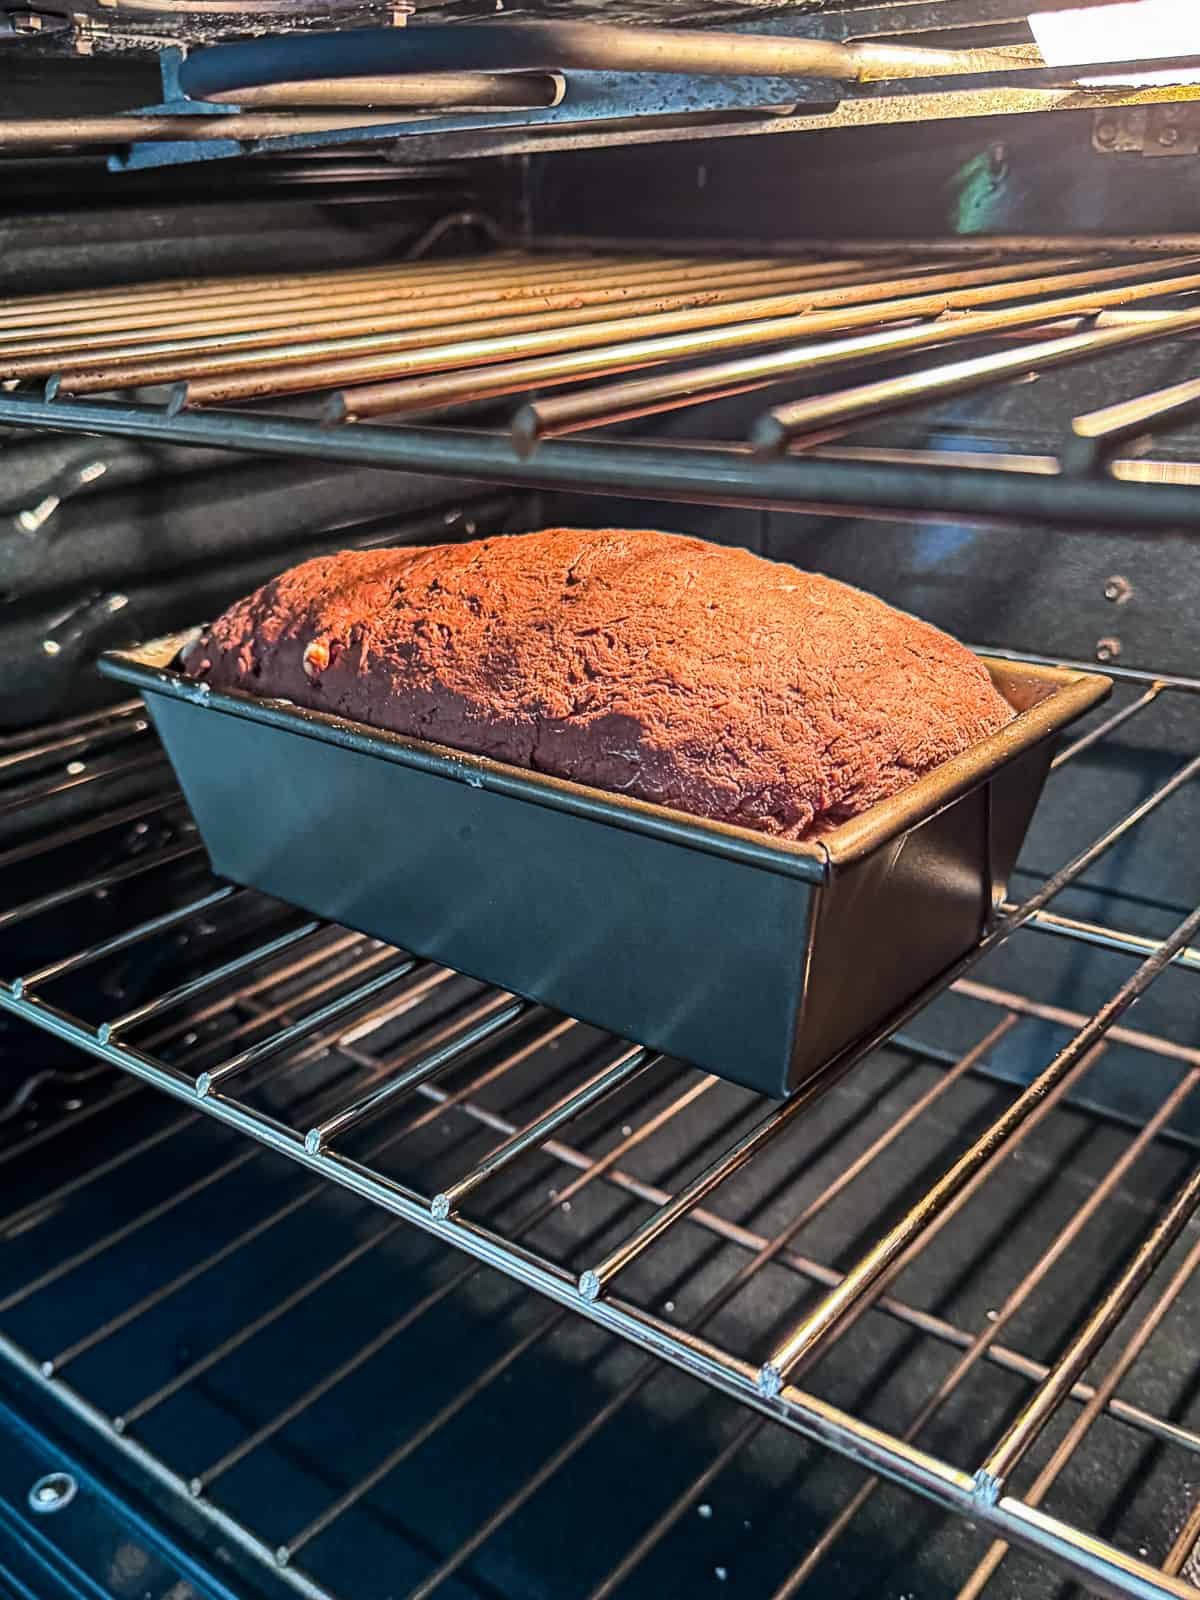 Baking Chocolate Yeast Bread In The Oven In A Loaf Pan